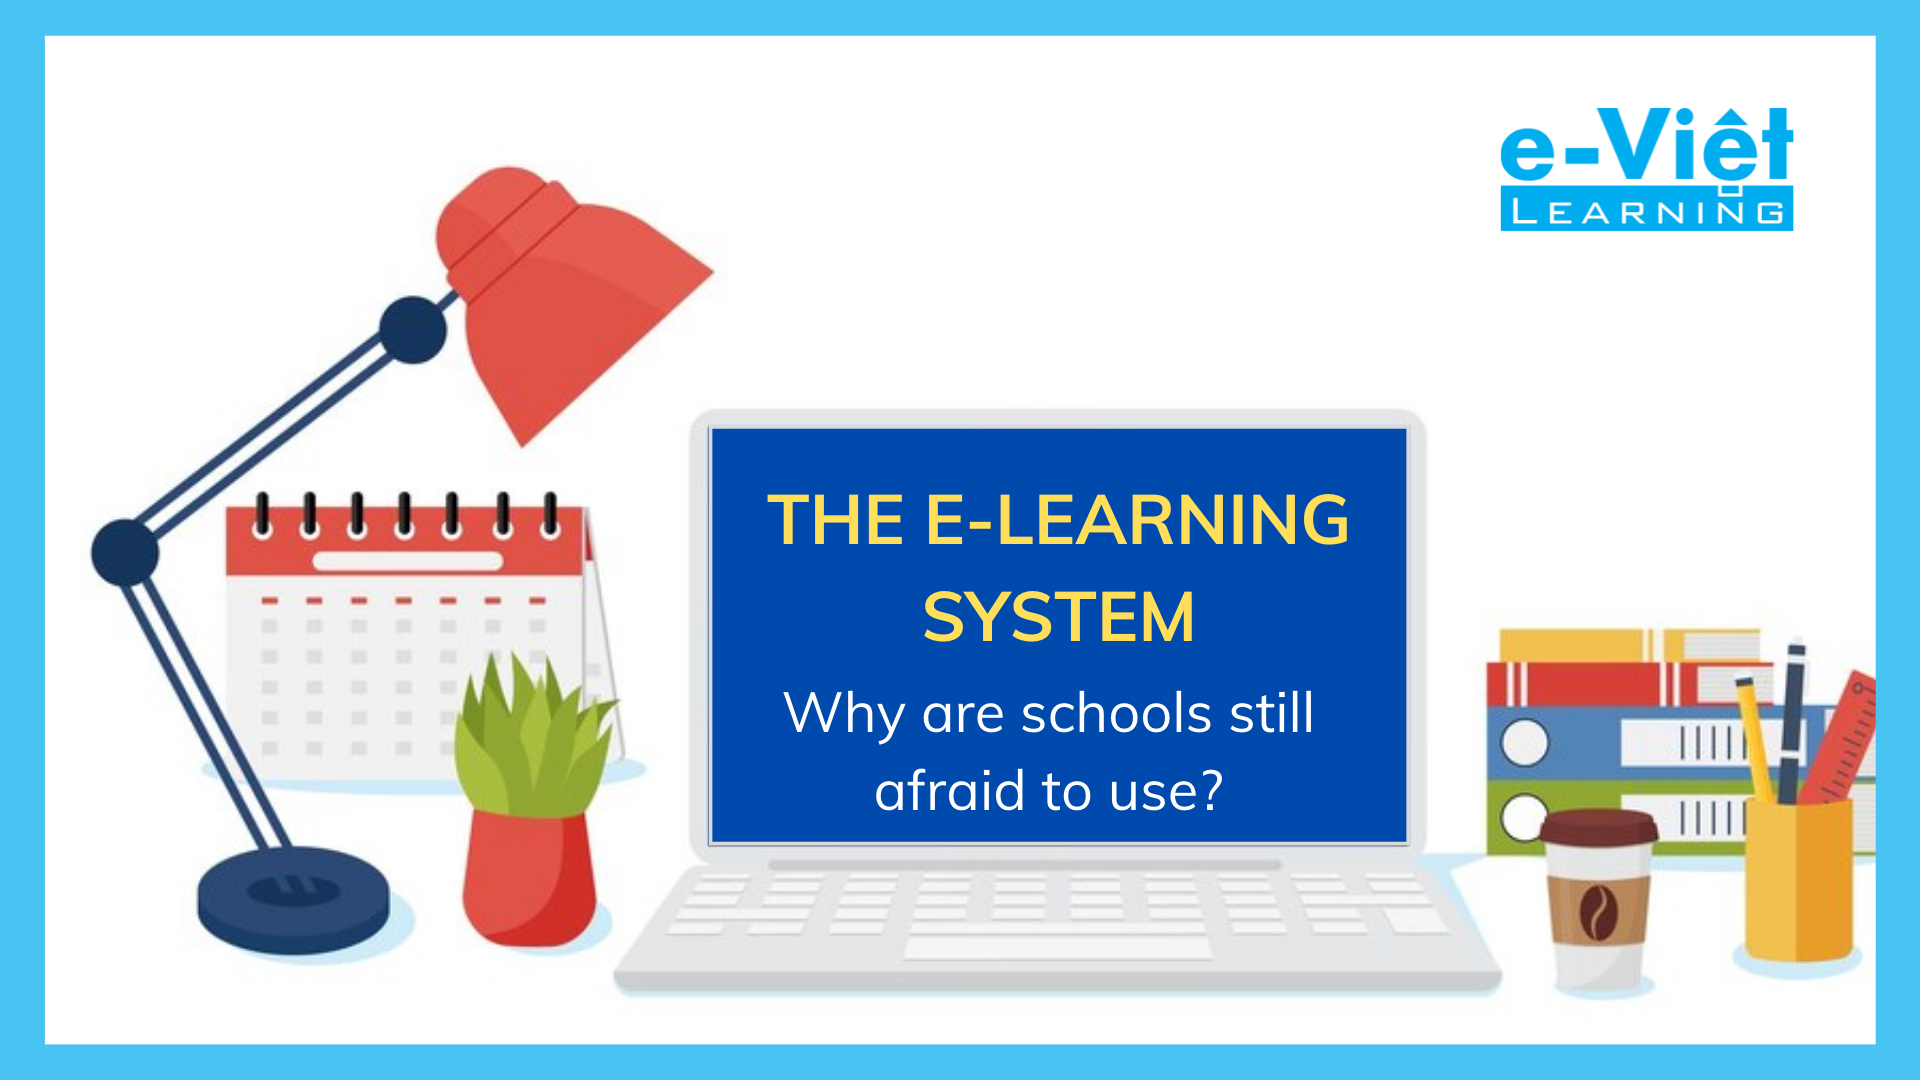 Why are schools still afraid to use the E-learning system?